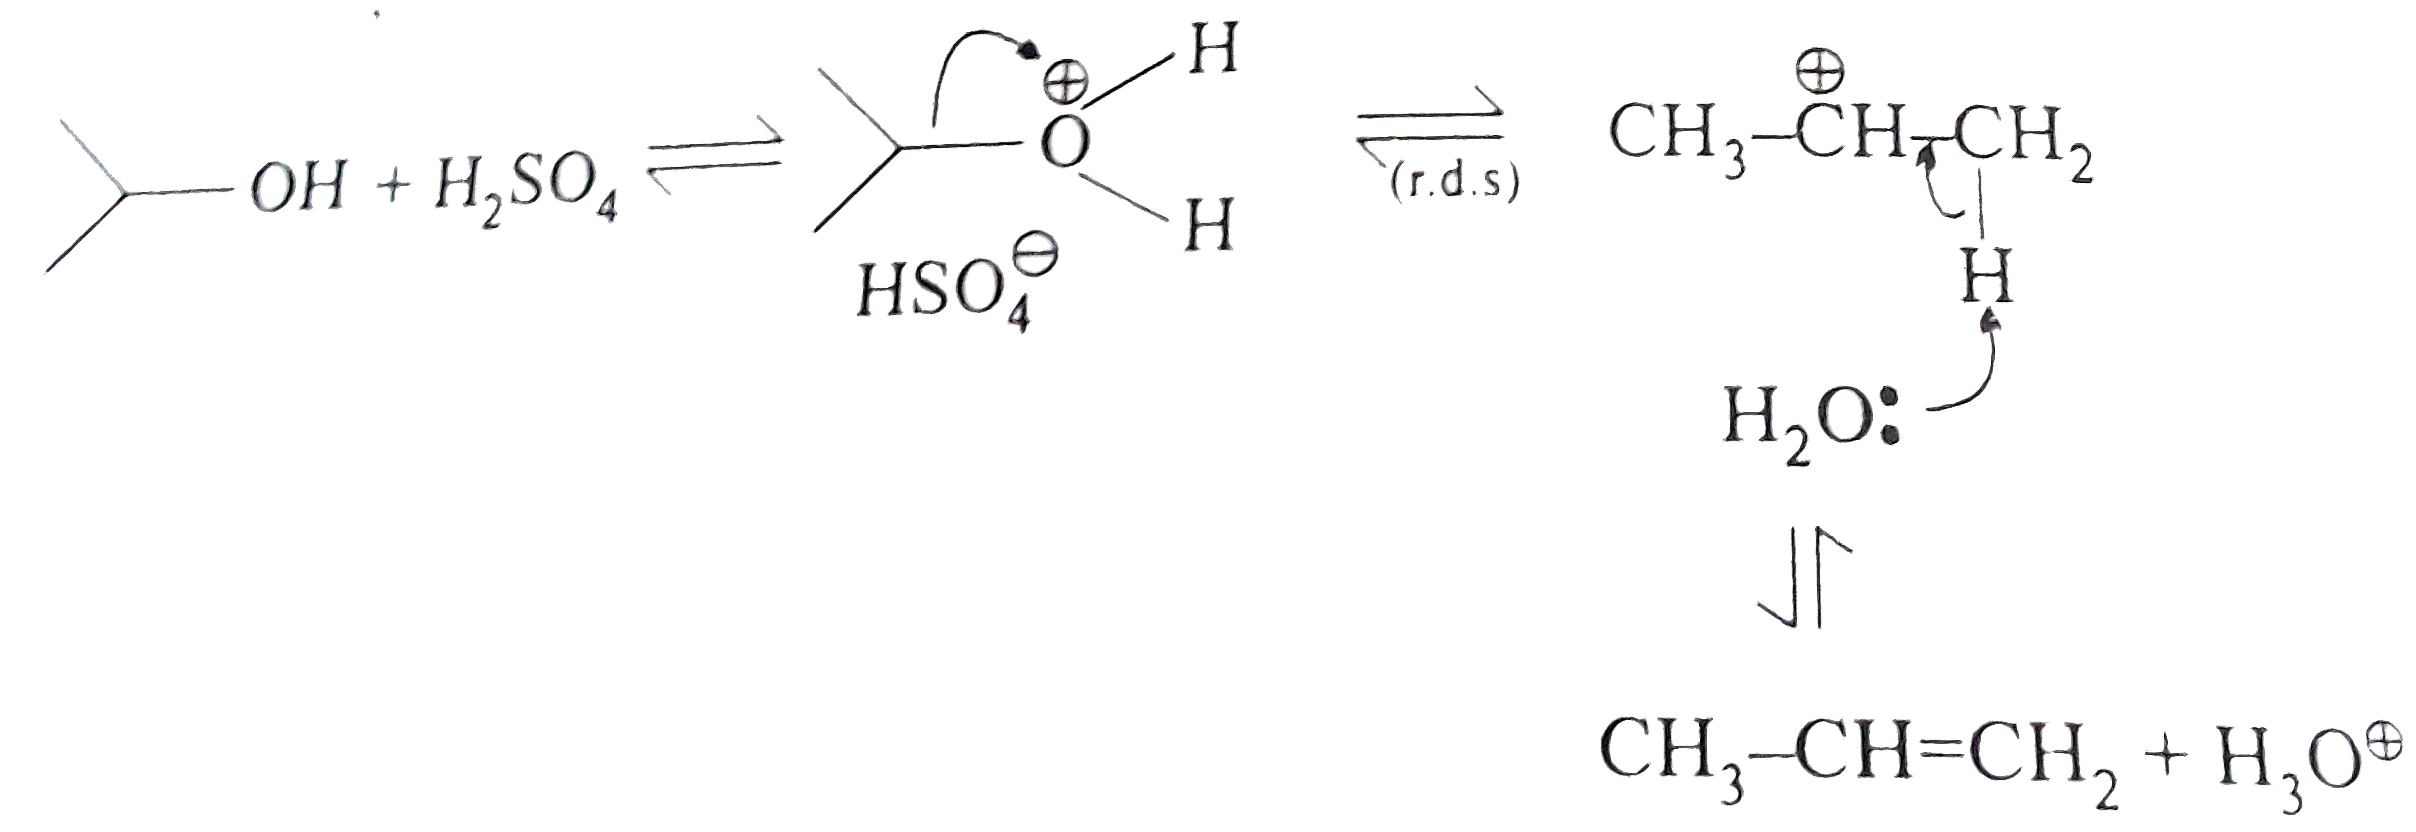 Dehydration require an acid catalyst to protonate the hydroxy group of the alcohol and convert it into good leaving group. Loss of water followed by a loss of proton, given the alkene an equilibrium is established between reactants and products.       To Improve the yield of above reaction which of following is correct.